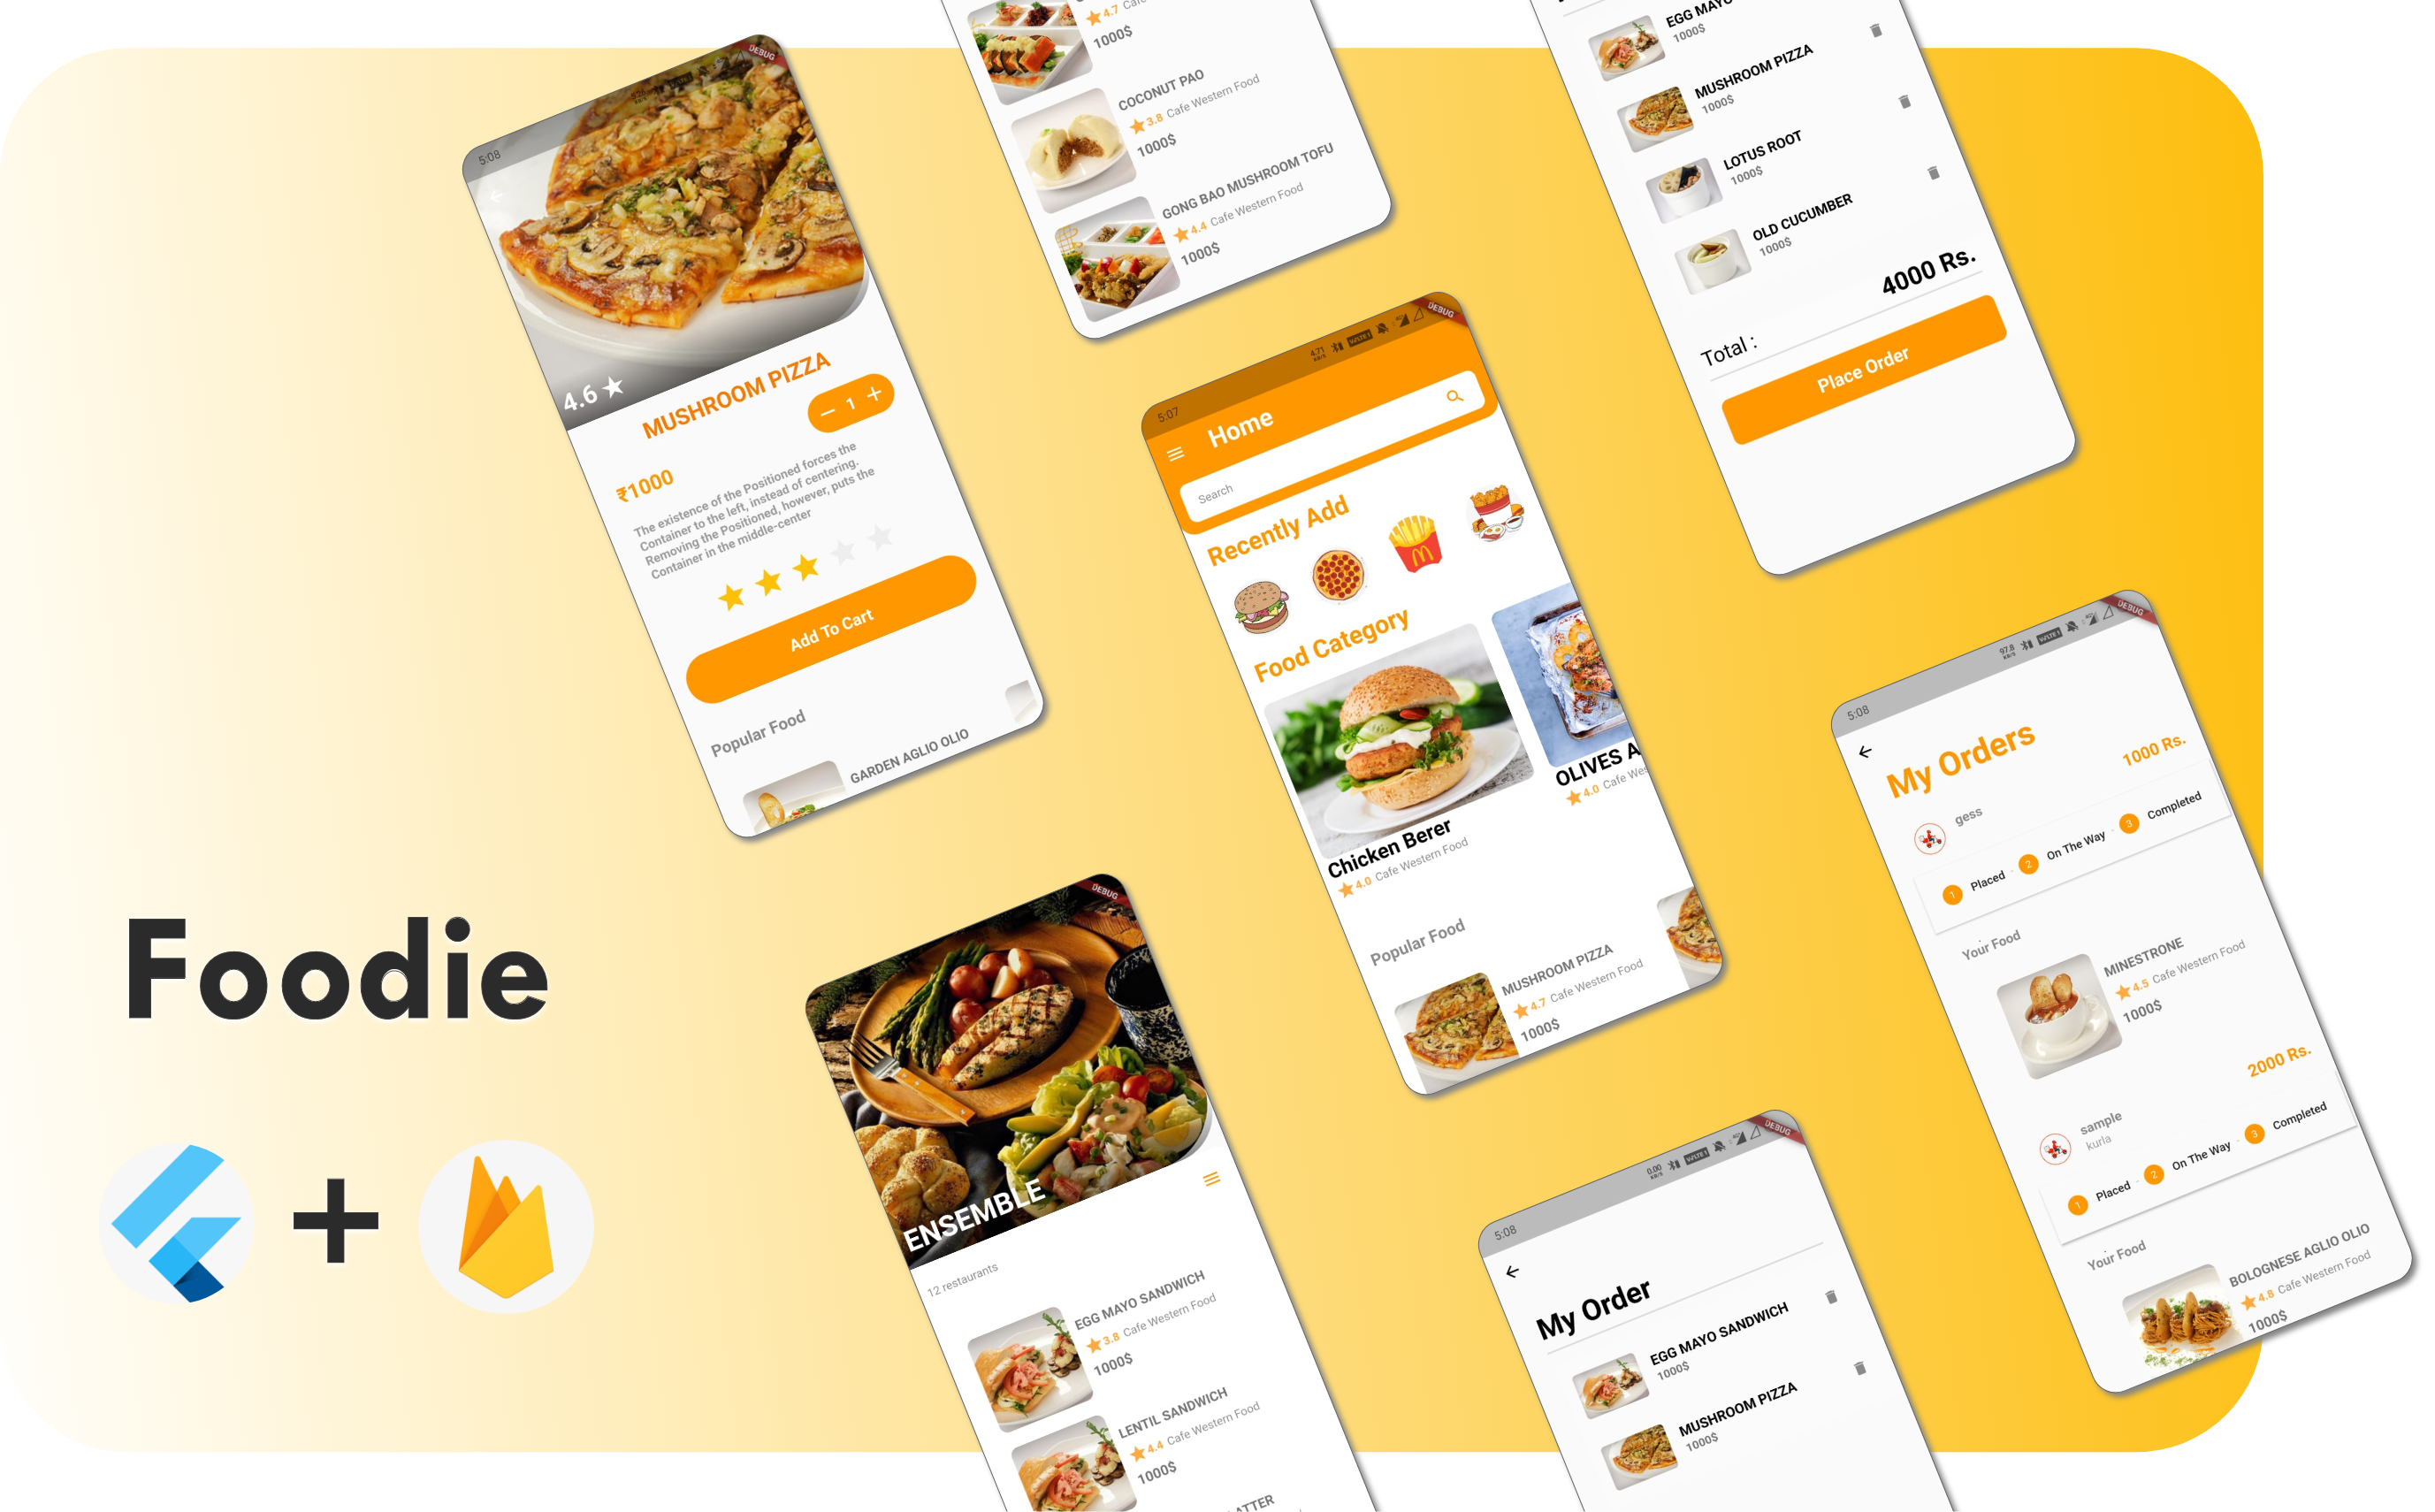 A food ordering and delivery application built with flutter